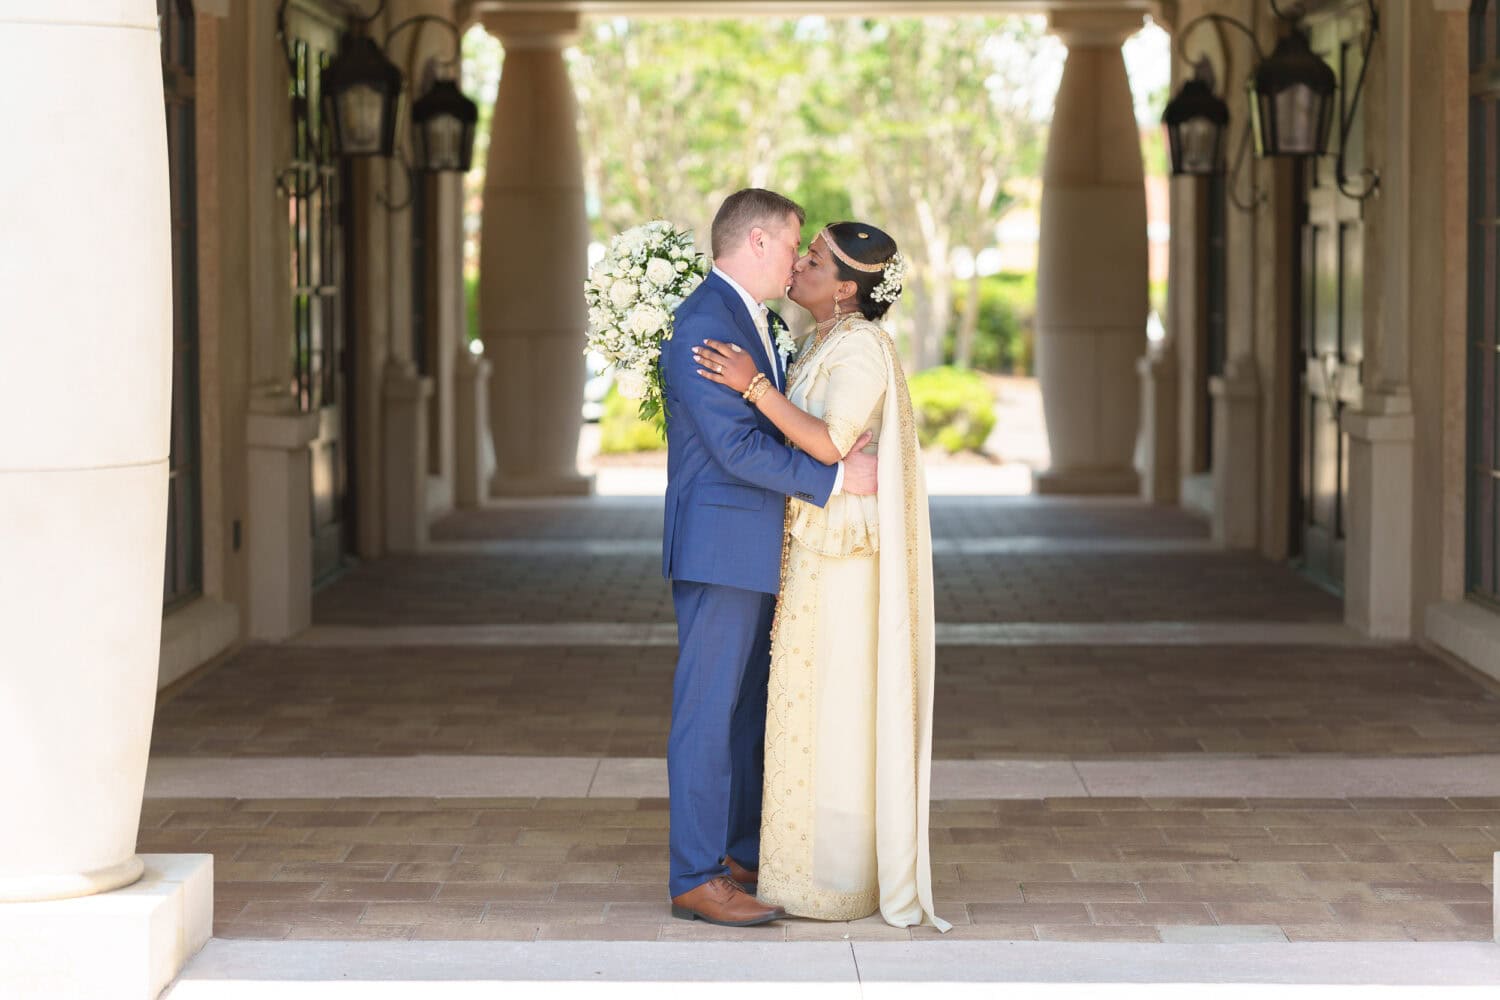 Portraits of the bride and groom under the columns in the courtyard - 21 Main Events